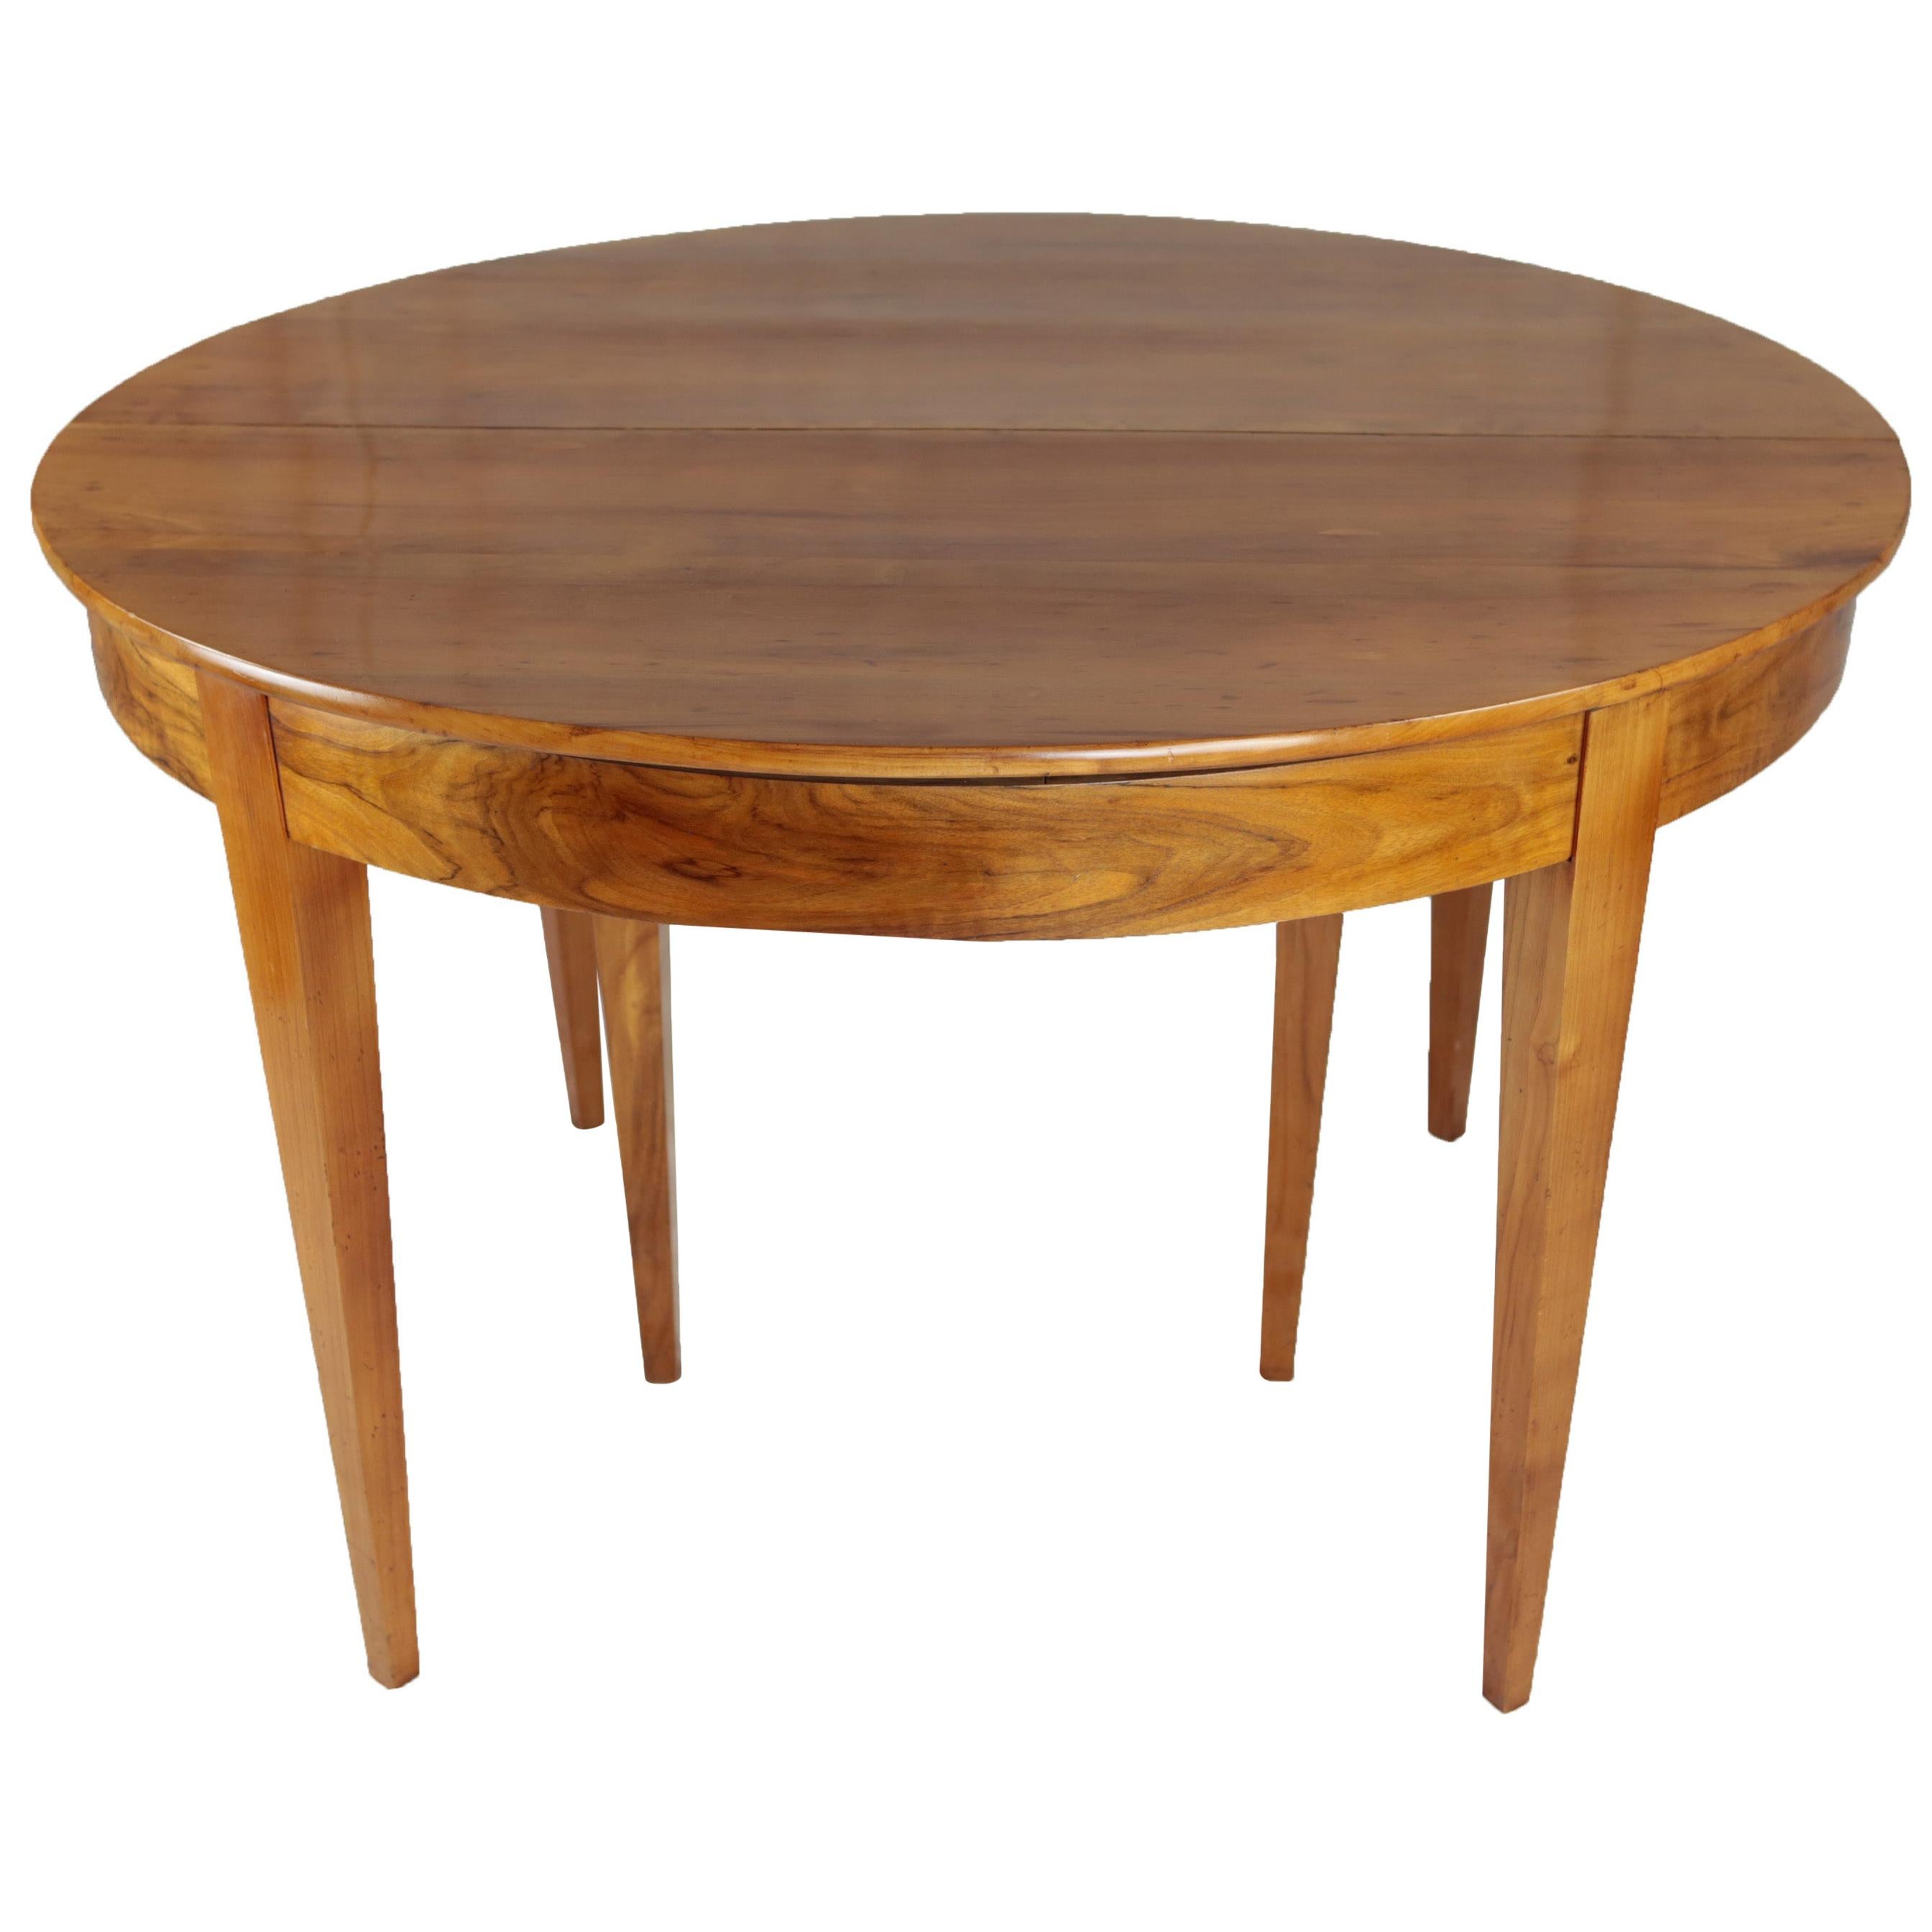 Biedermeier Period Dining Table, circa 1830-1840, Cherry and Nutwood, Extendable For Sale